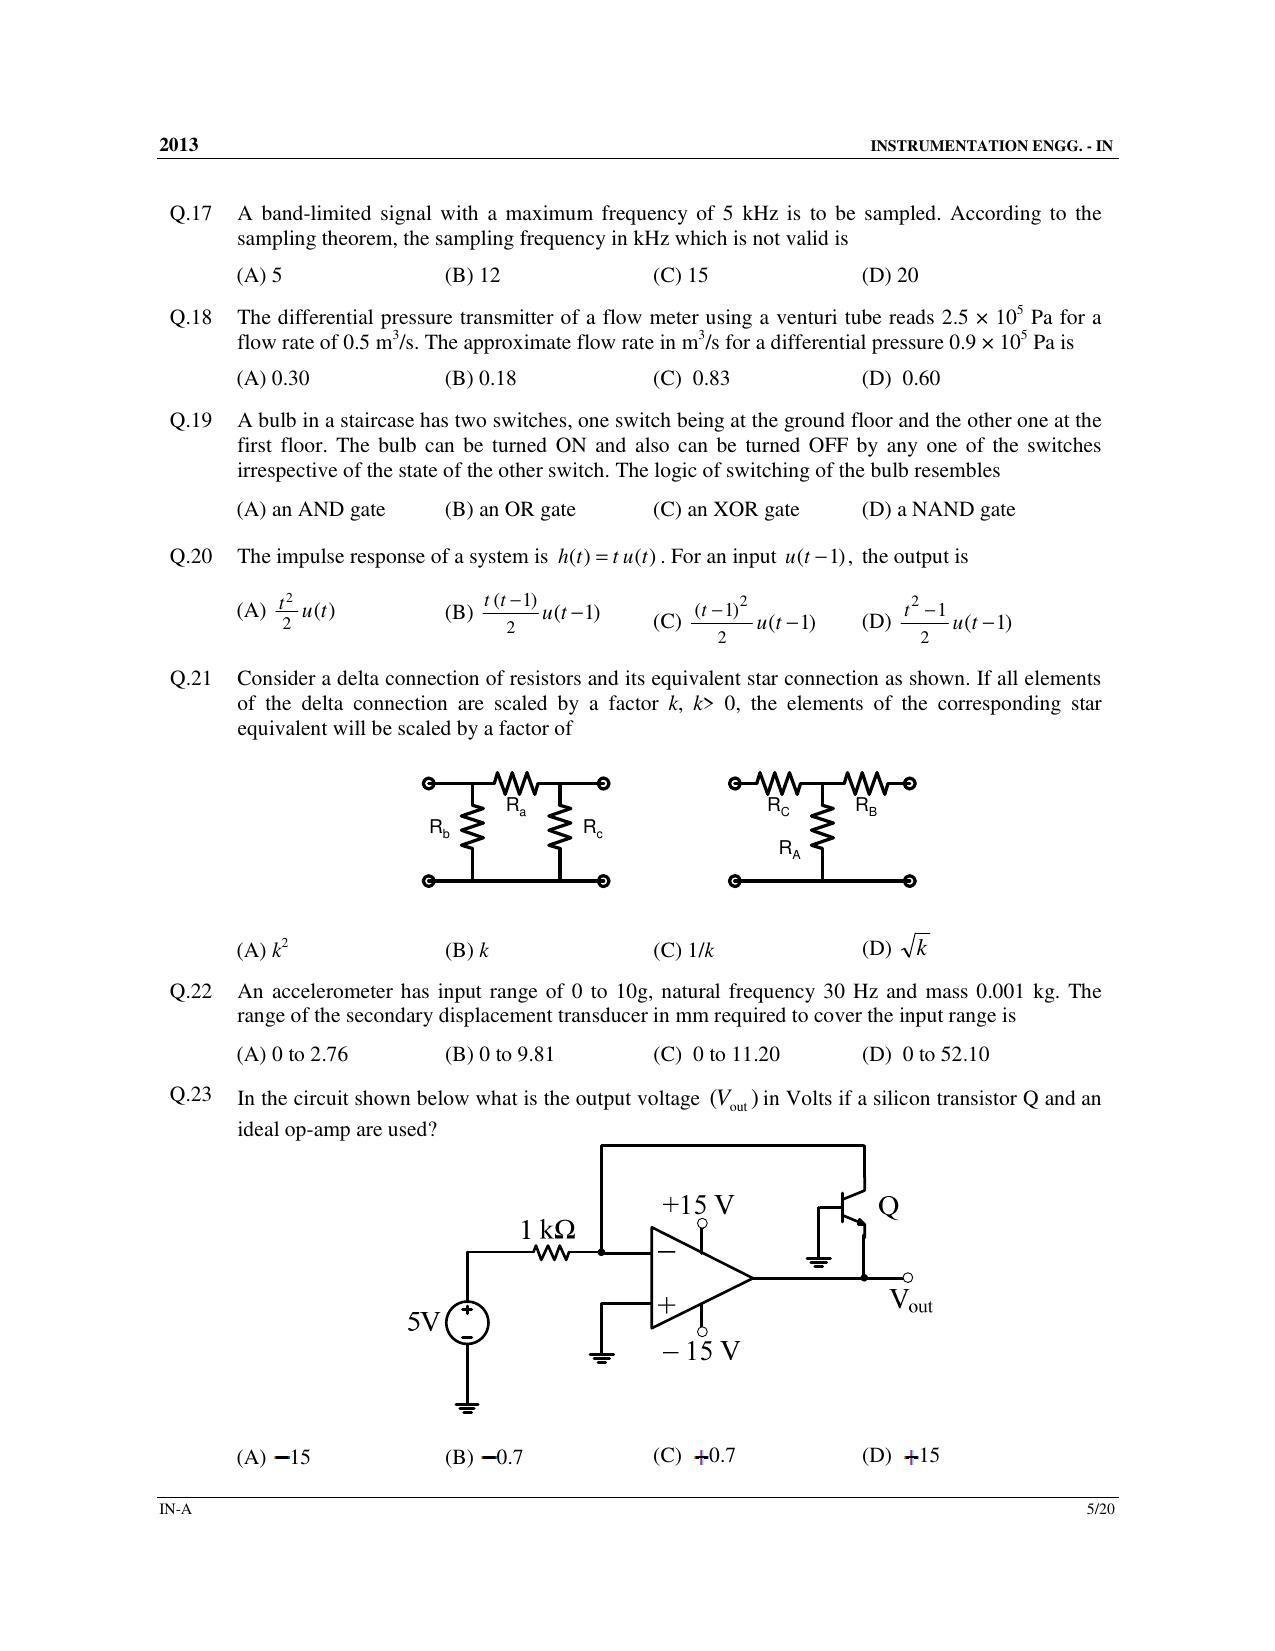 GATE 2013 Instrumentation Engineering (IN) Question Paper with Answer Key - Page 6